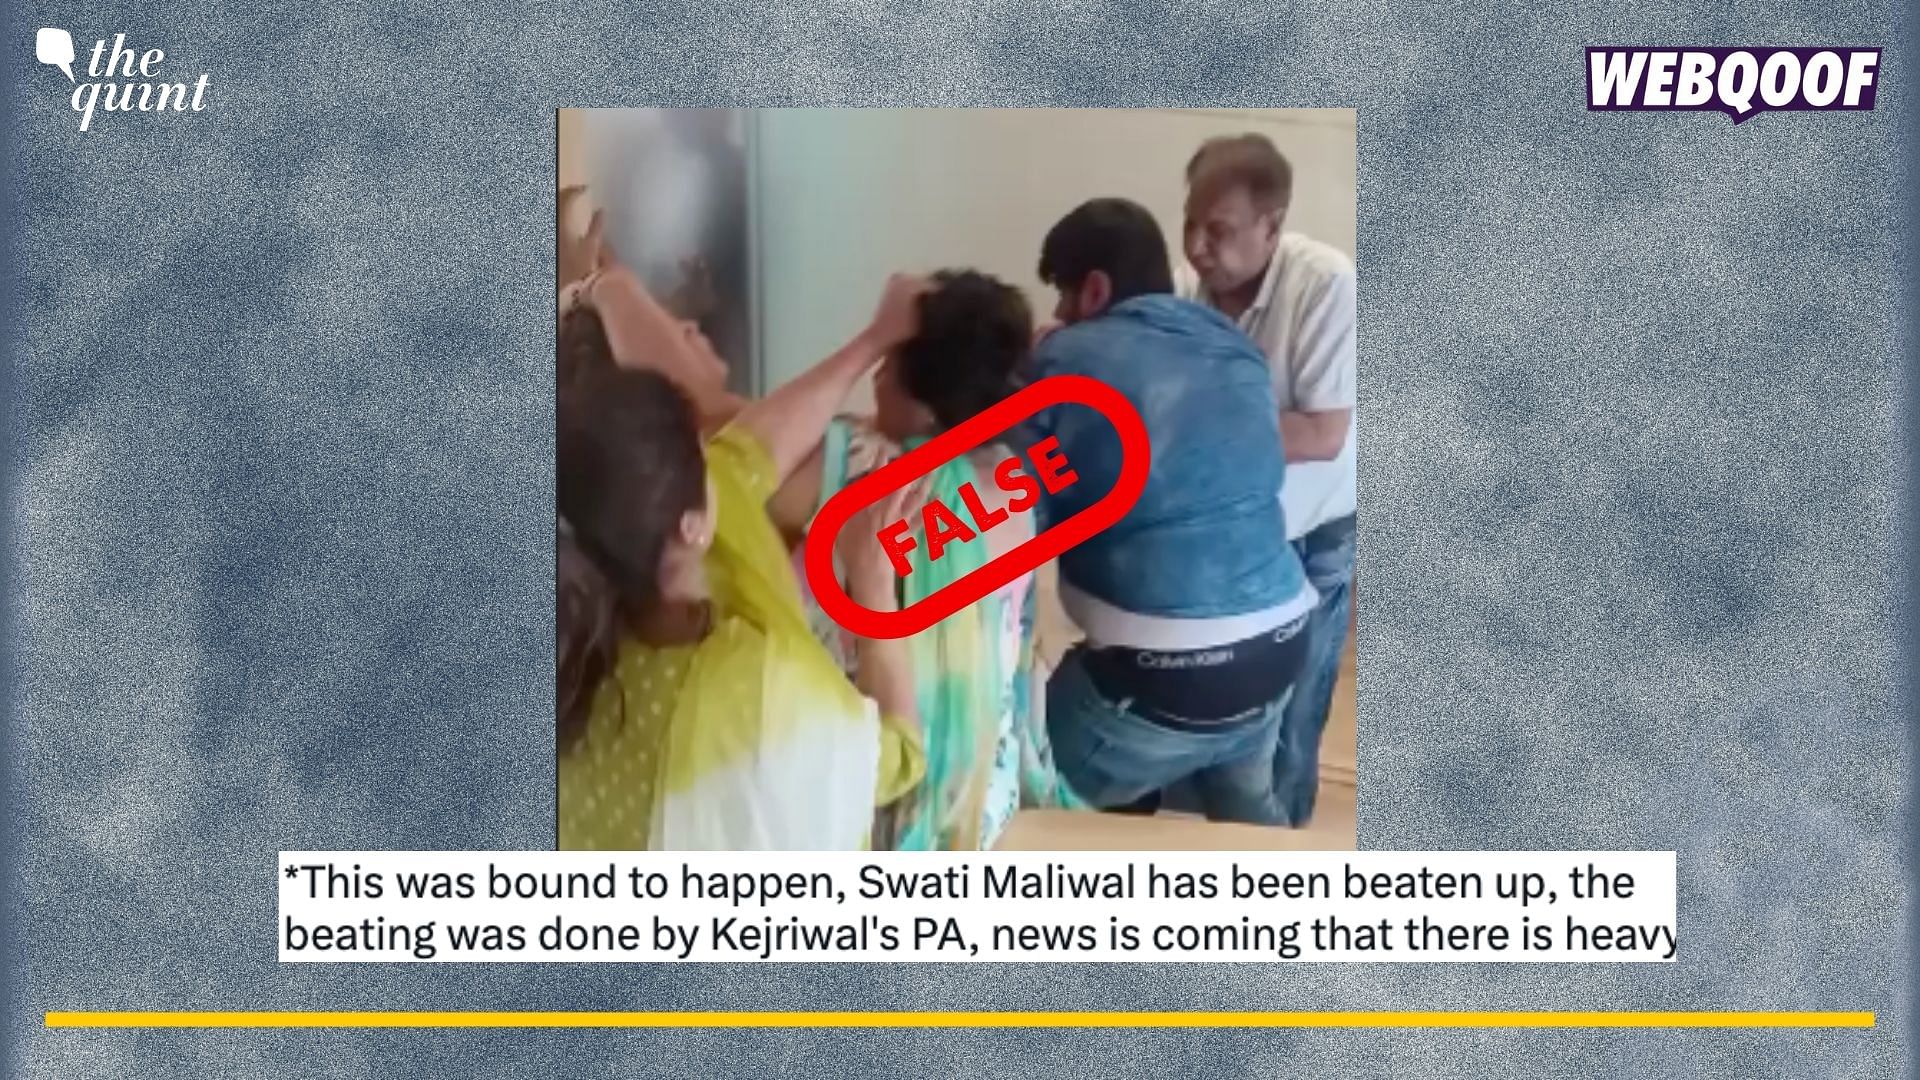 <div class="paragraphs"><p>Fact-Check: This does not show Swati Maliwal being assaulted.&nbsp;</p></div>